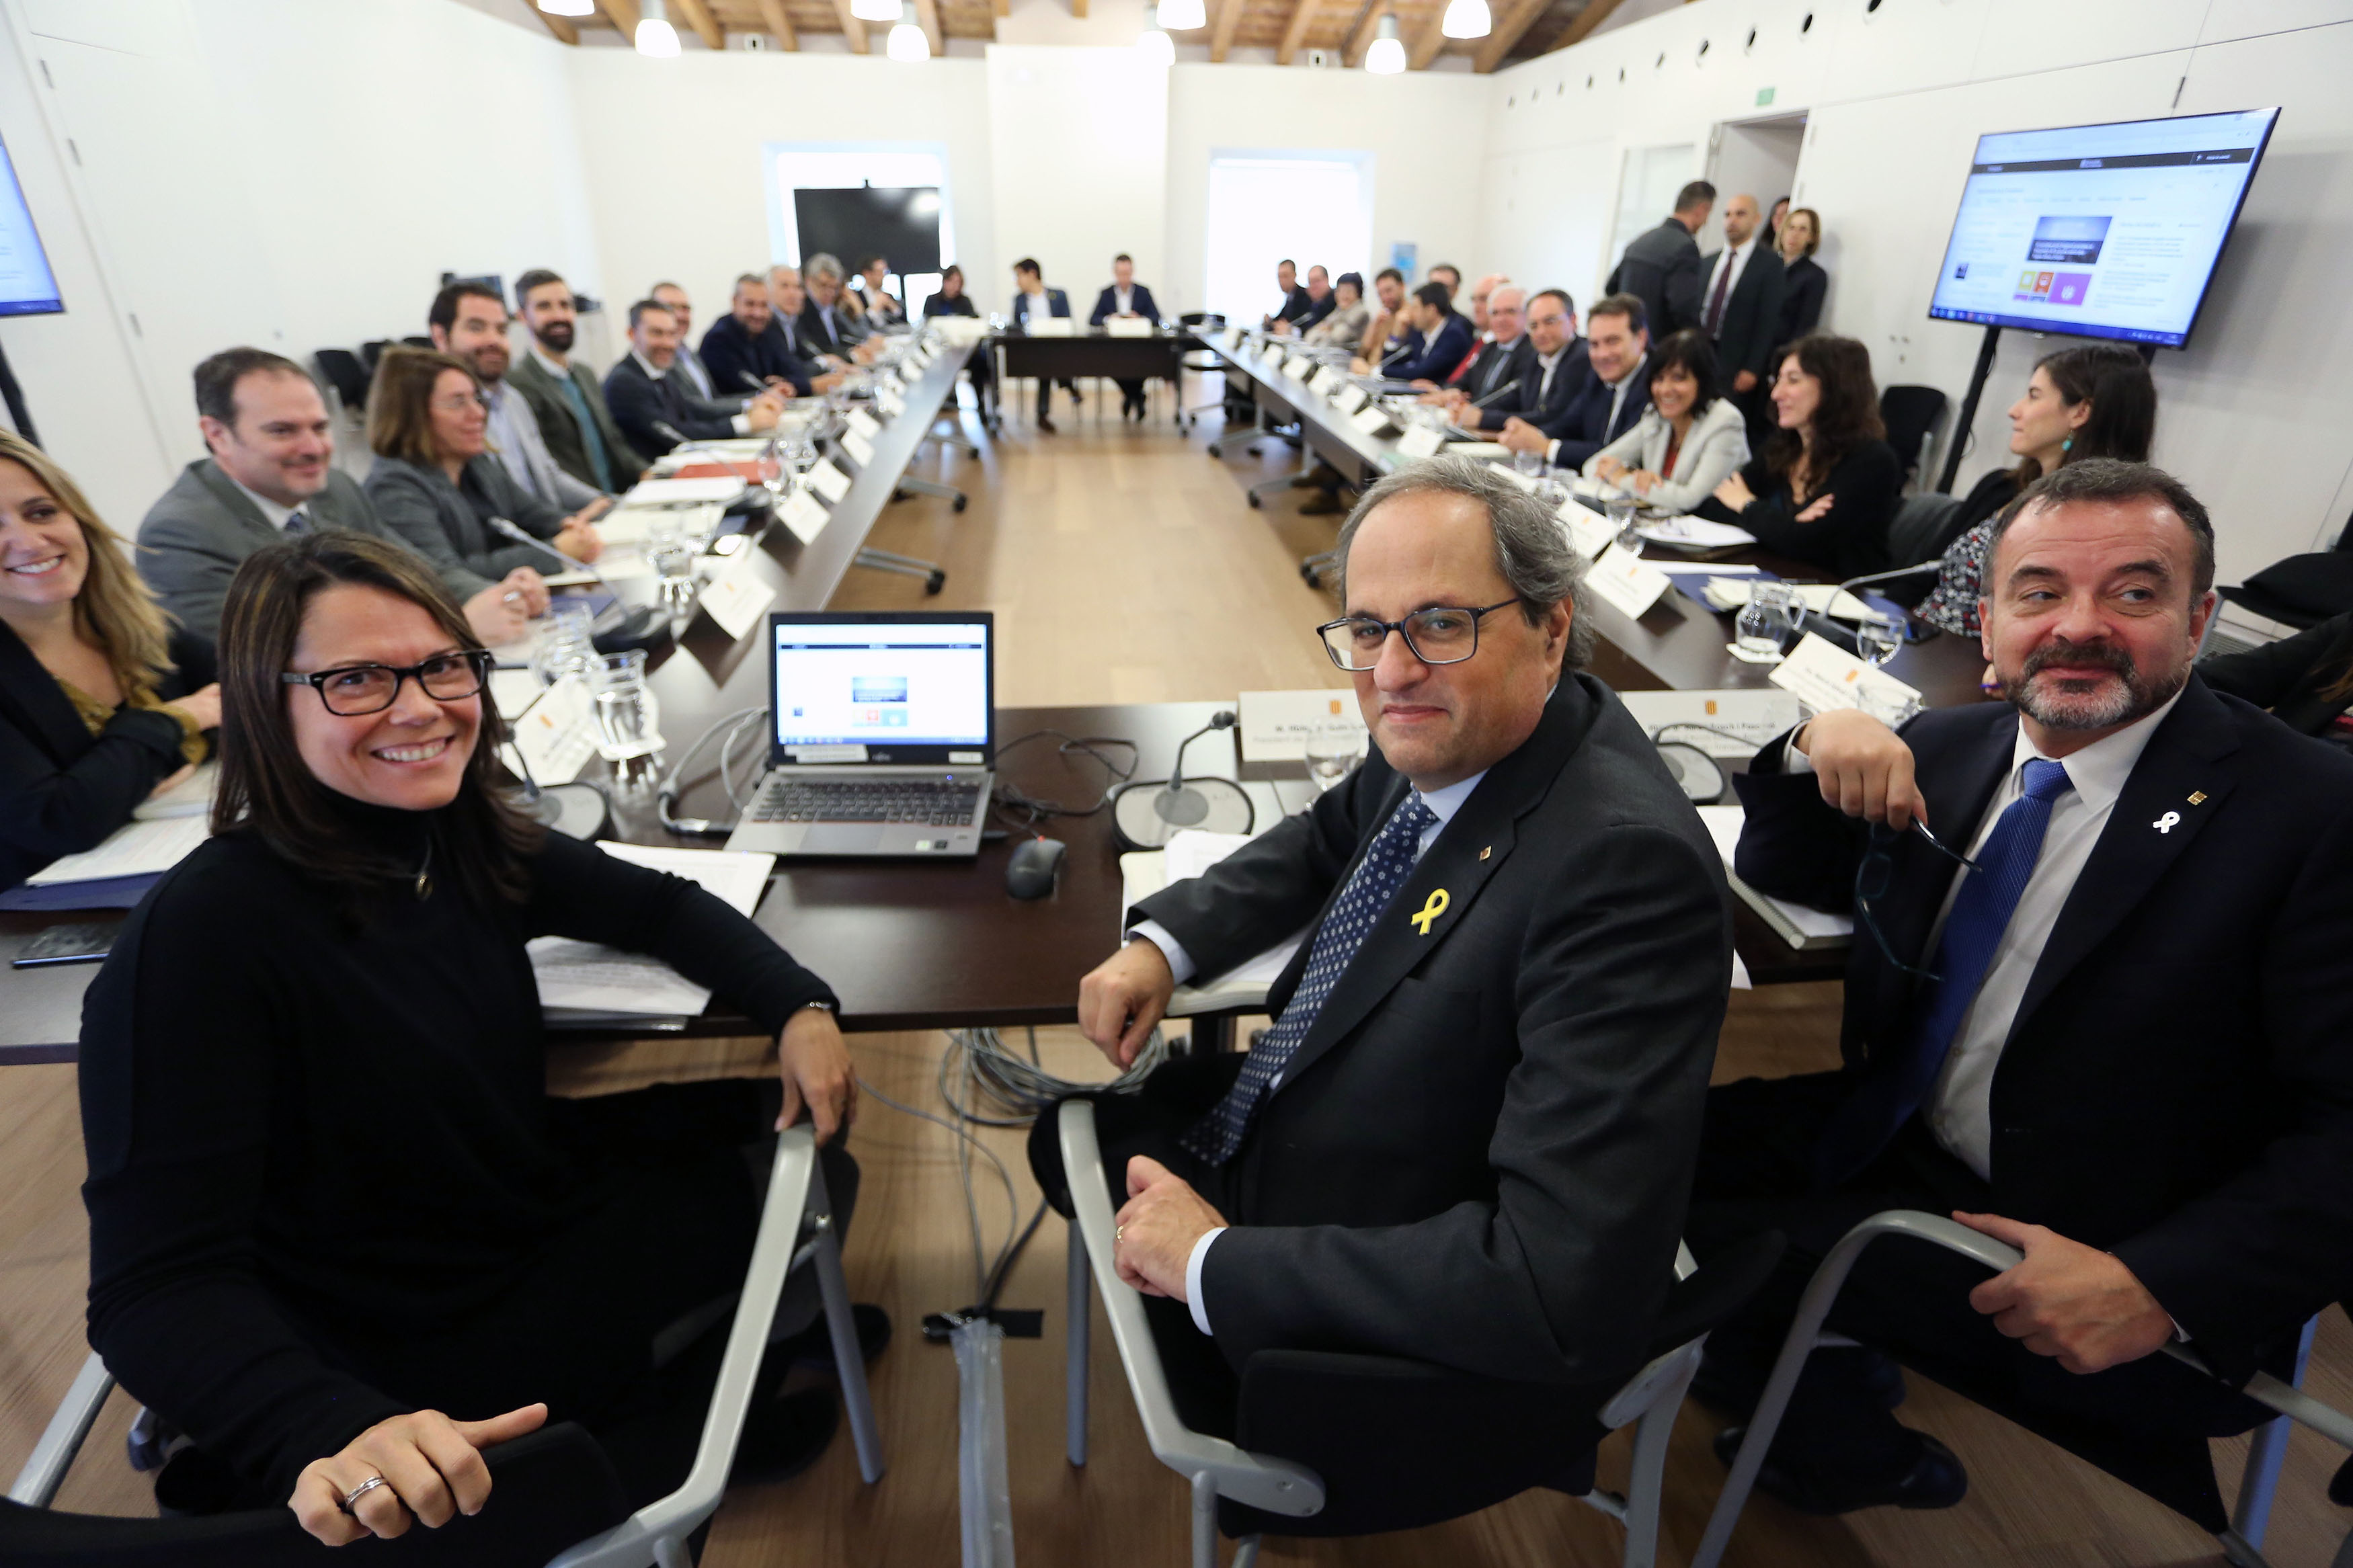 Laura Foraster (left), Quim Torra, and Alfred Bosch at the Diplocat plenary on December 17 2018 (photo courtesy of the Catalan government)